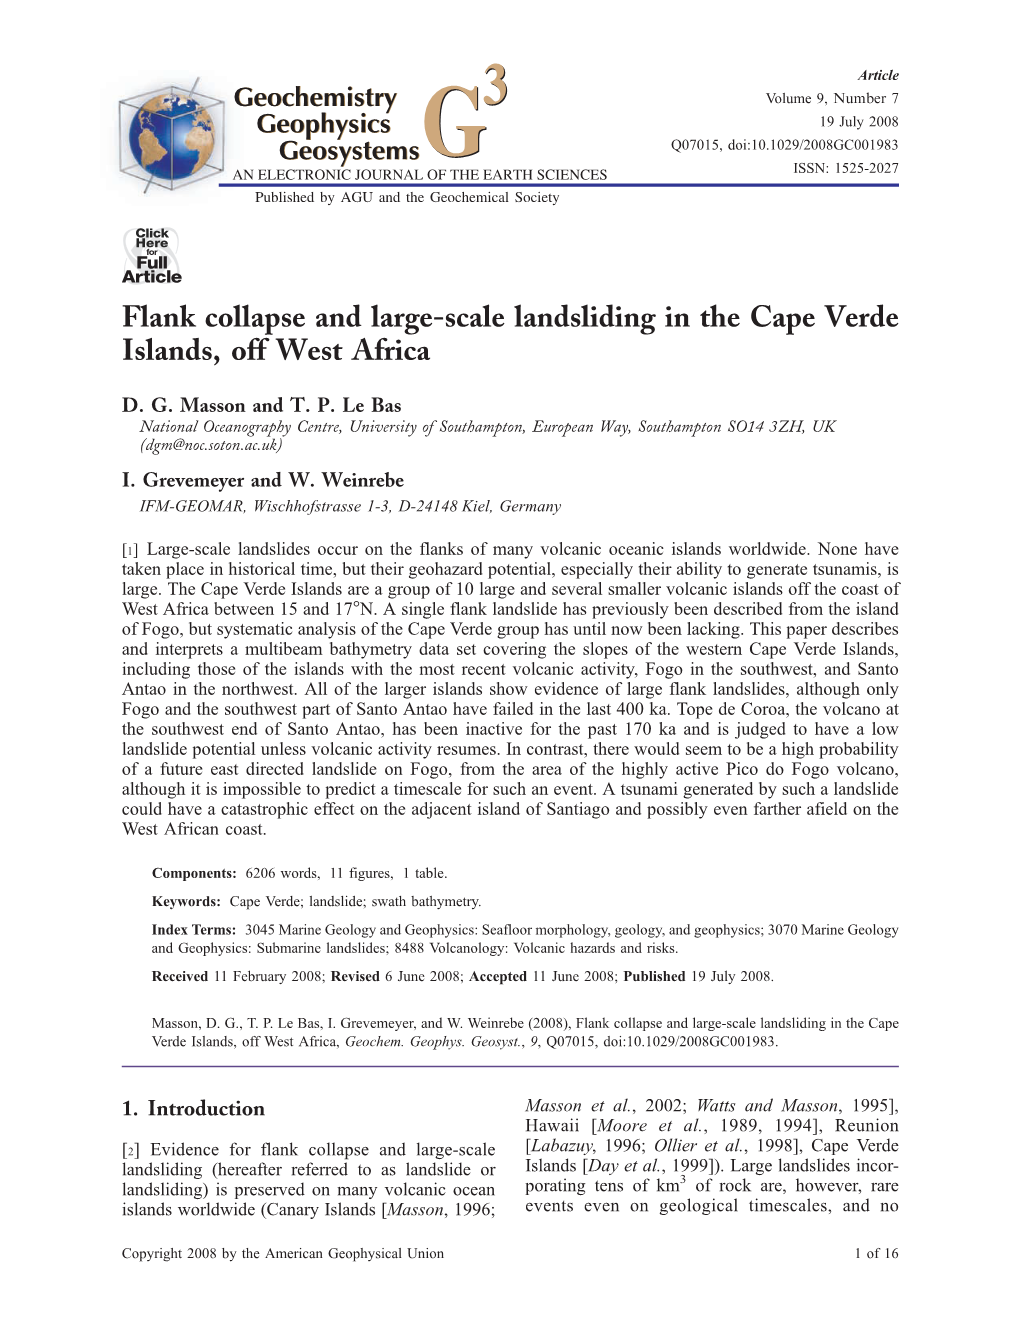 Flank Collapse and Large-Scale Landsliding in the Cape Verde Islands, Off West Africa